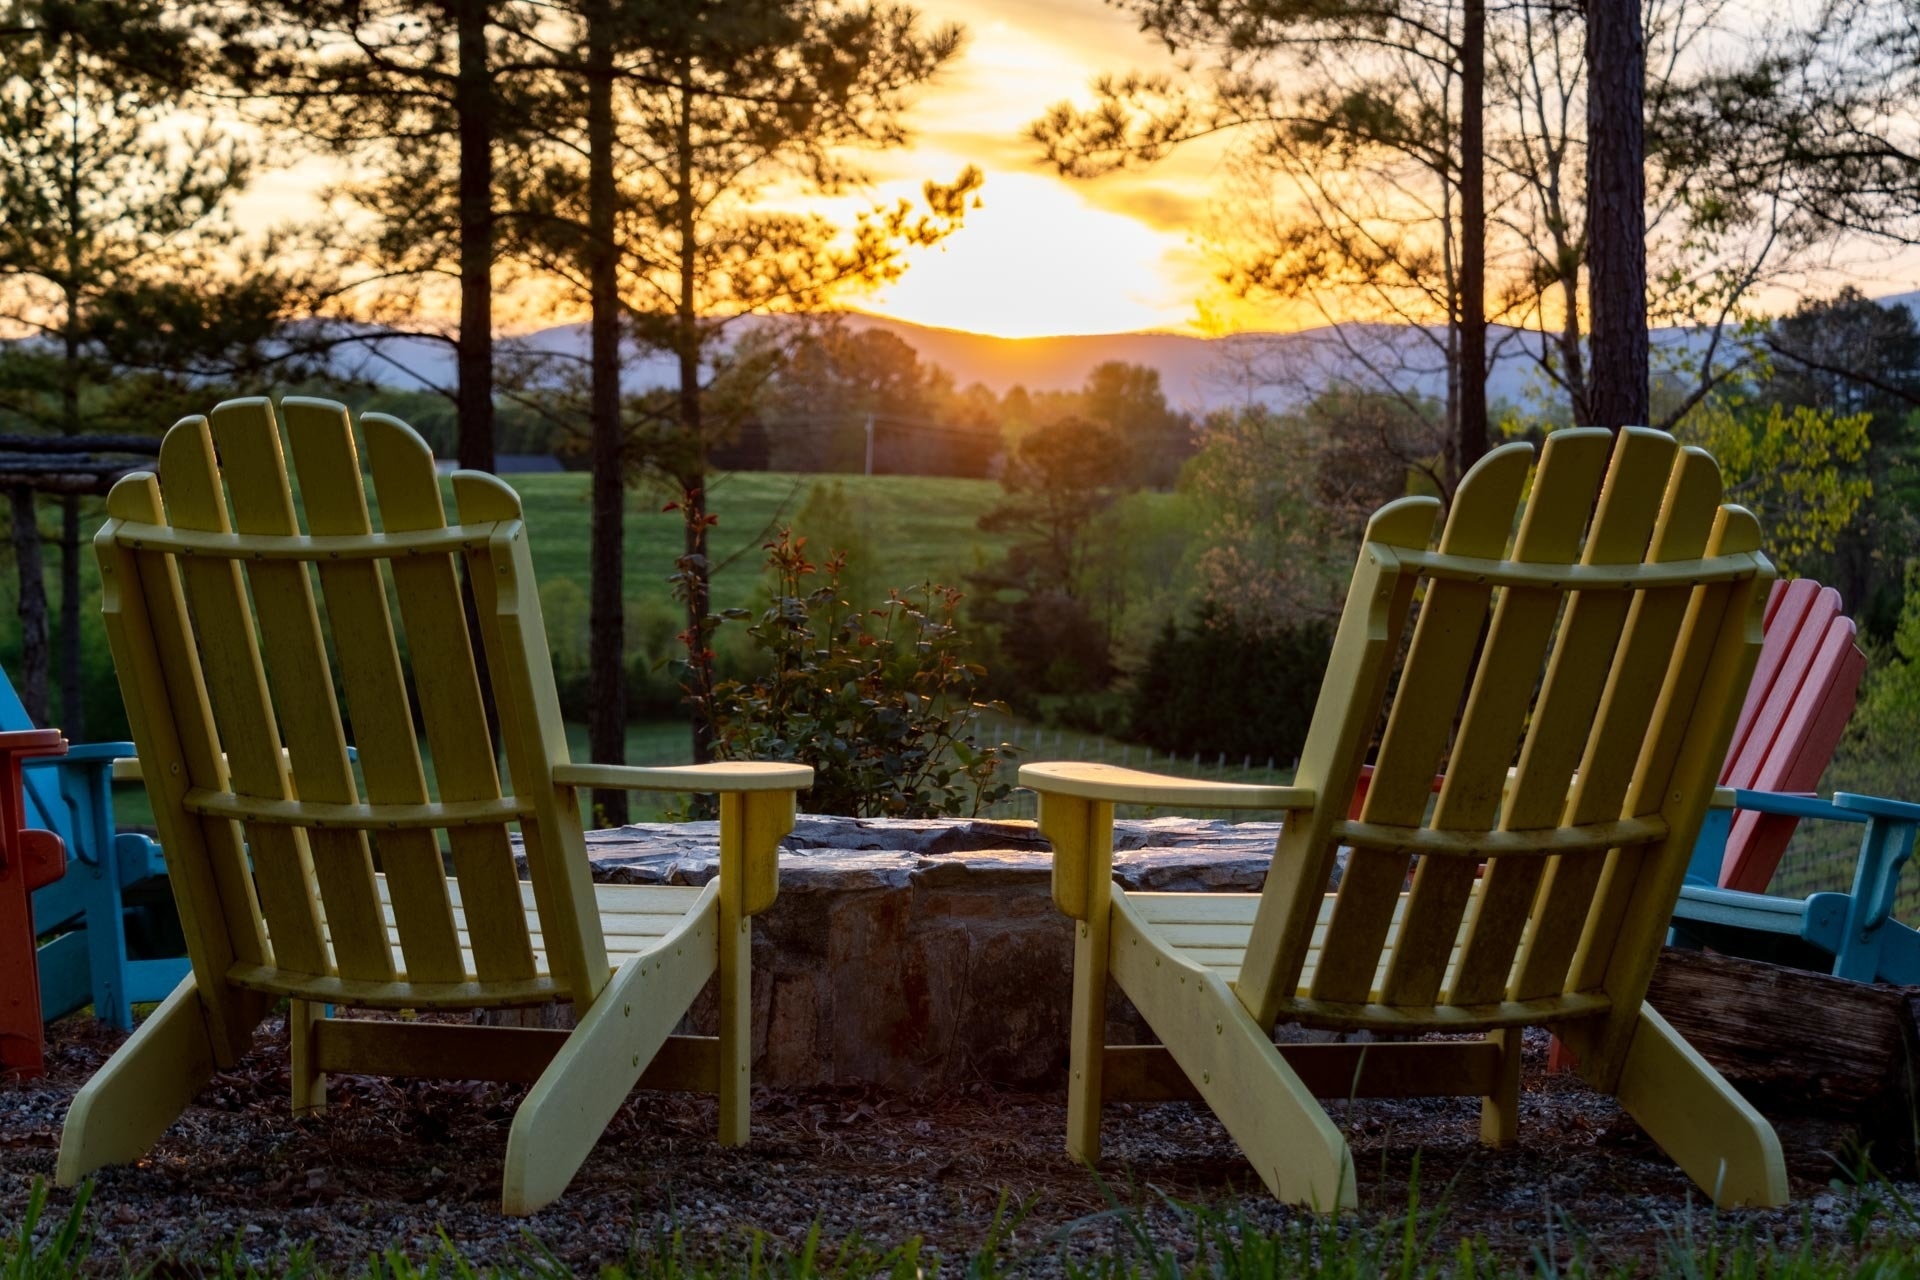 A beautiful and relaxing place to view the sun as it sets behind the North Carolina mountains.  The wines are very delicious too!  Visit www.VanInBlack.com and you can book a winery tour of the region which includes 3-4 wineries..